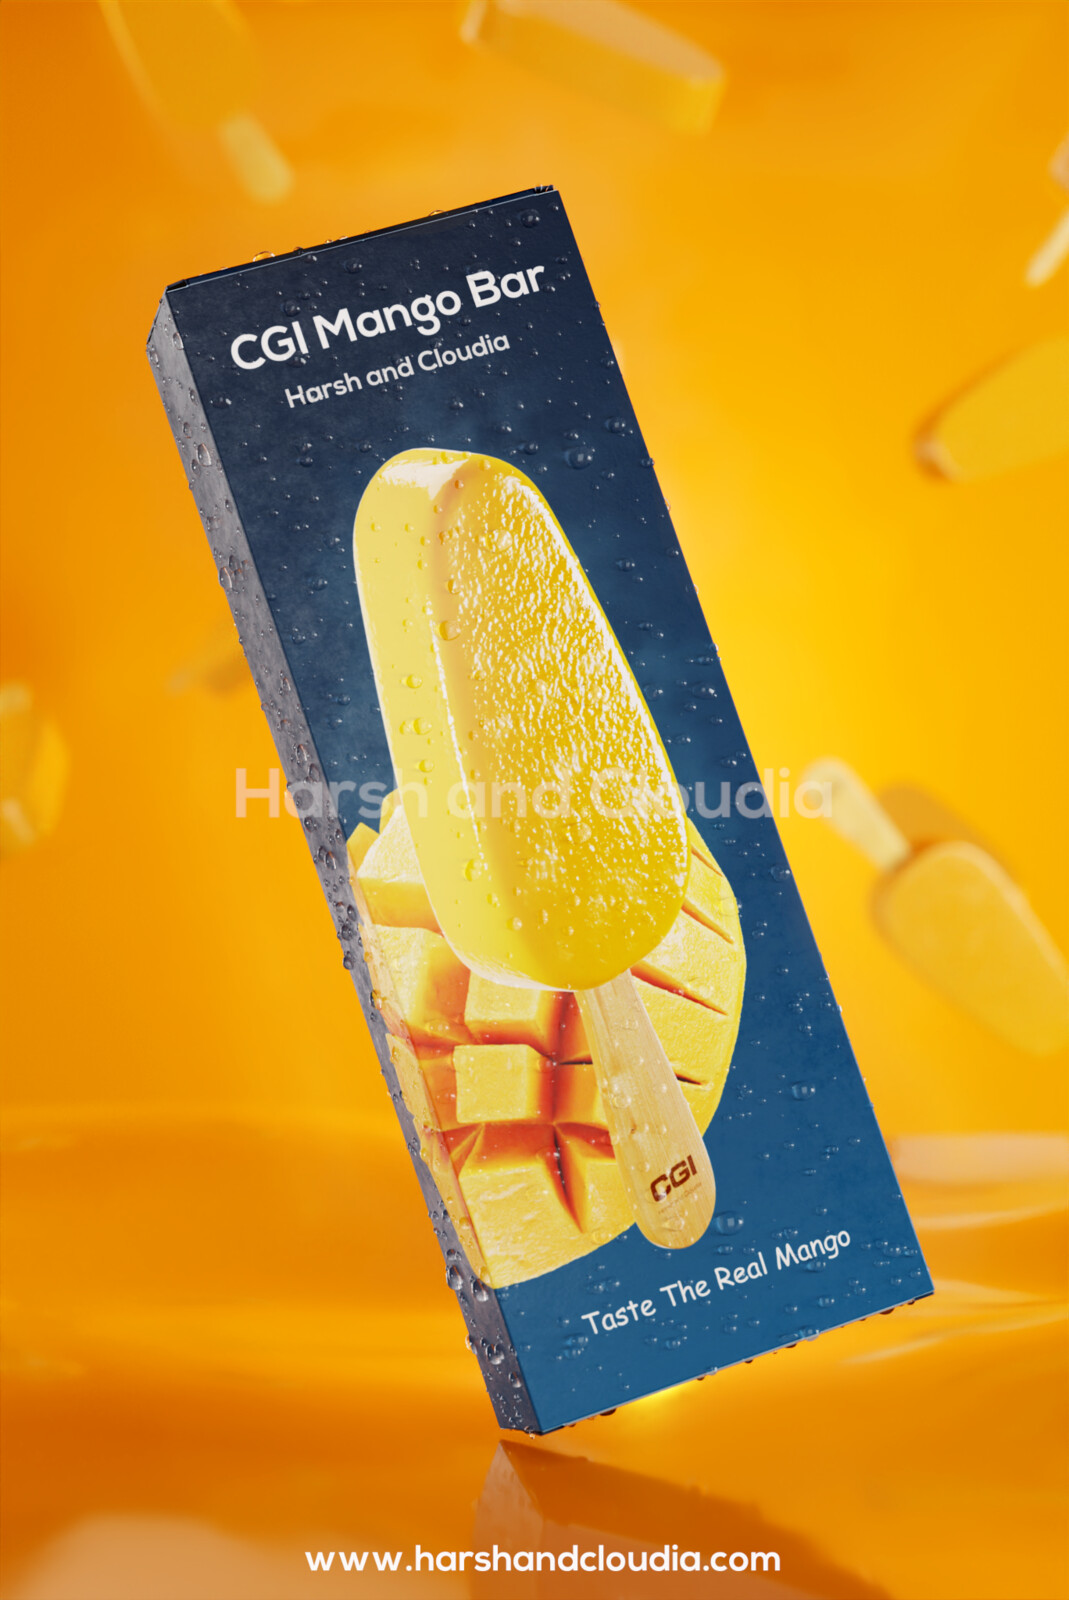 An Ex of how 3D illustration sliced mango and mango bar can be on packaging labels. This expands great control over the design and image that is used. Stunning packaging shot rendered for design demonstration and product launch visual grabs attention.